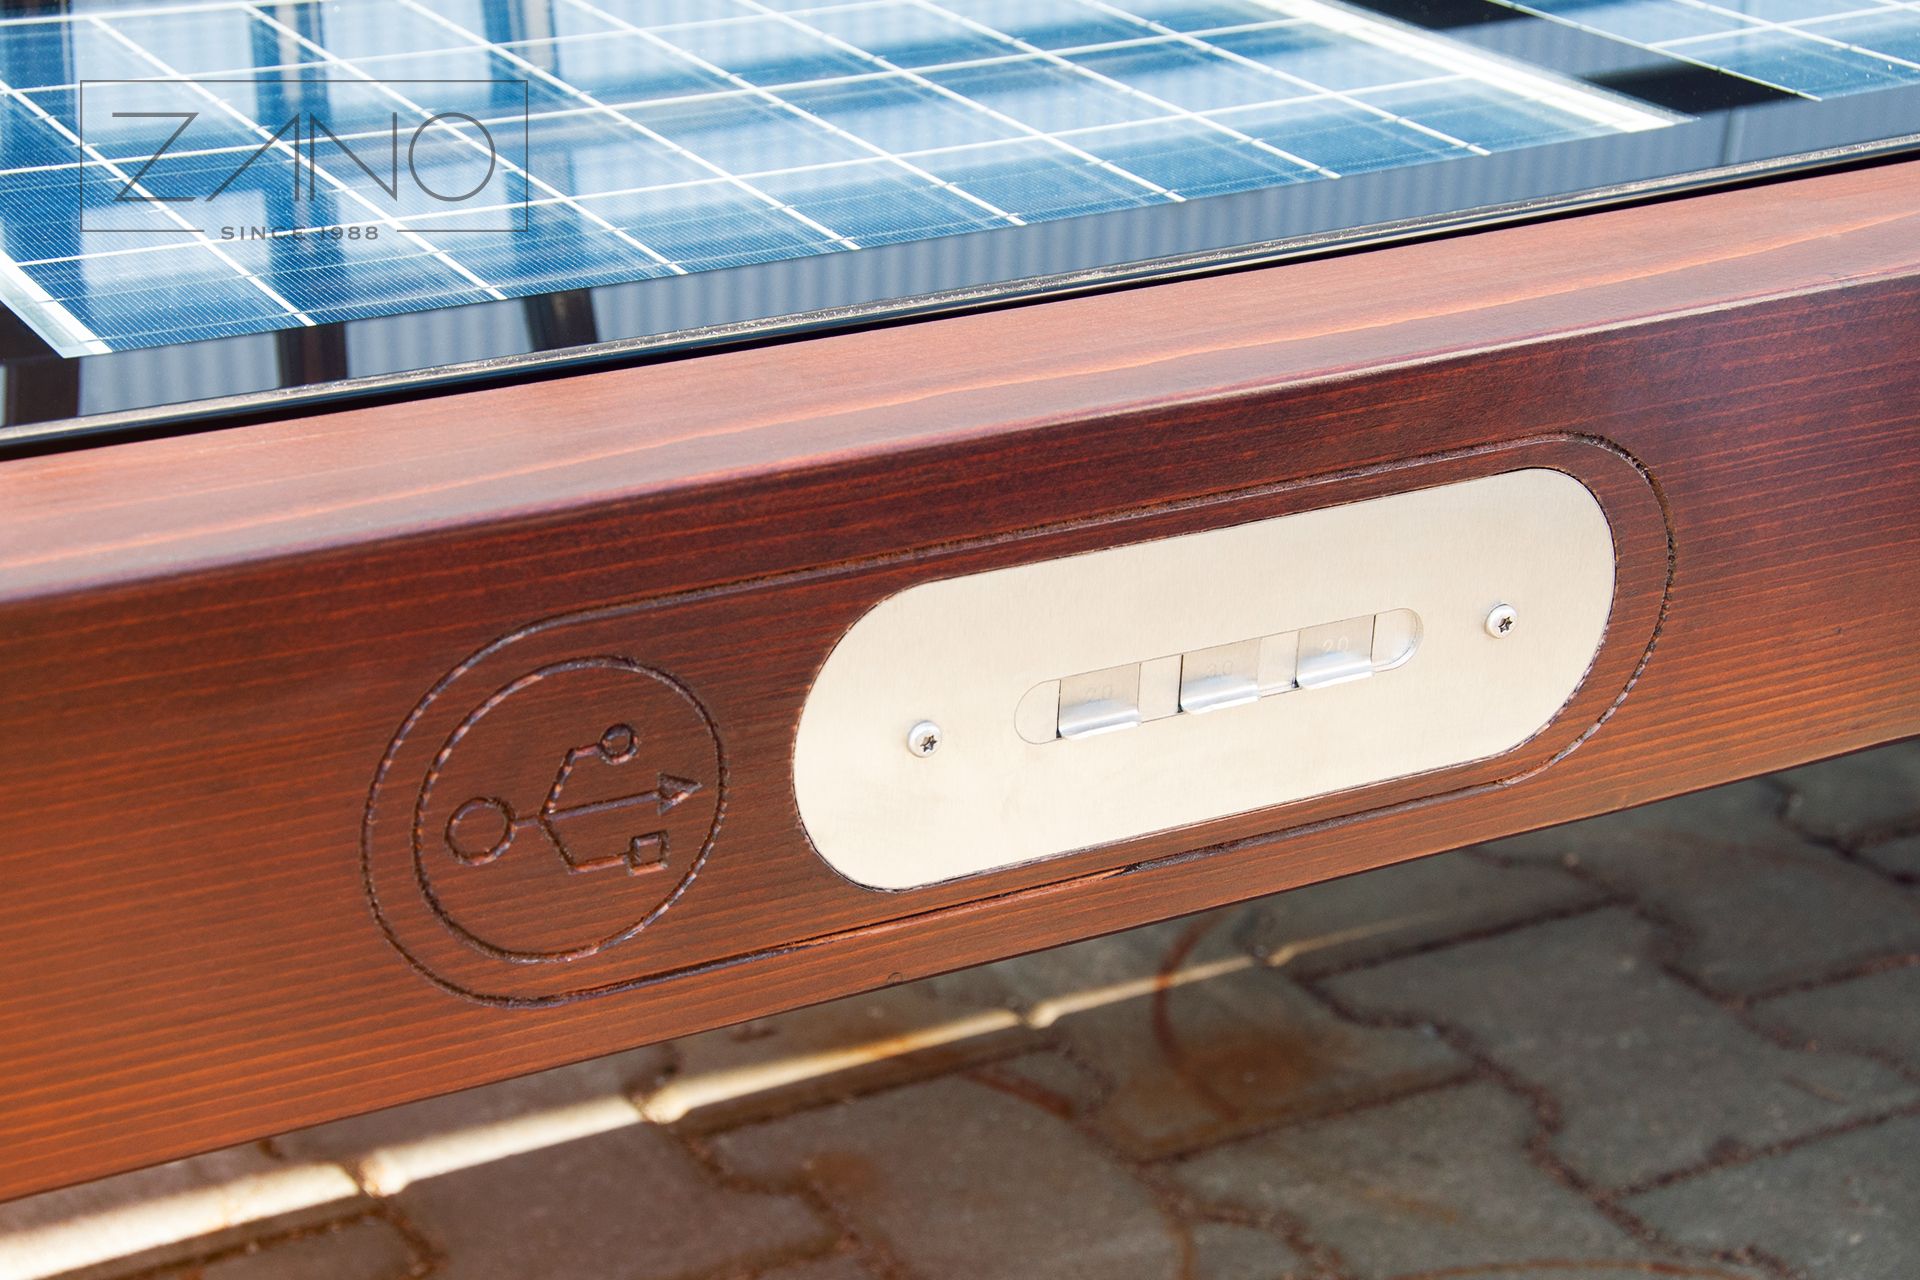 USB module ver. 2022 | Solar benches with photovoltaic panels